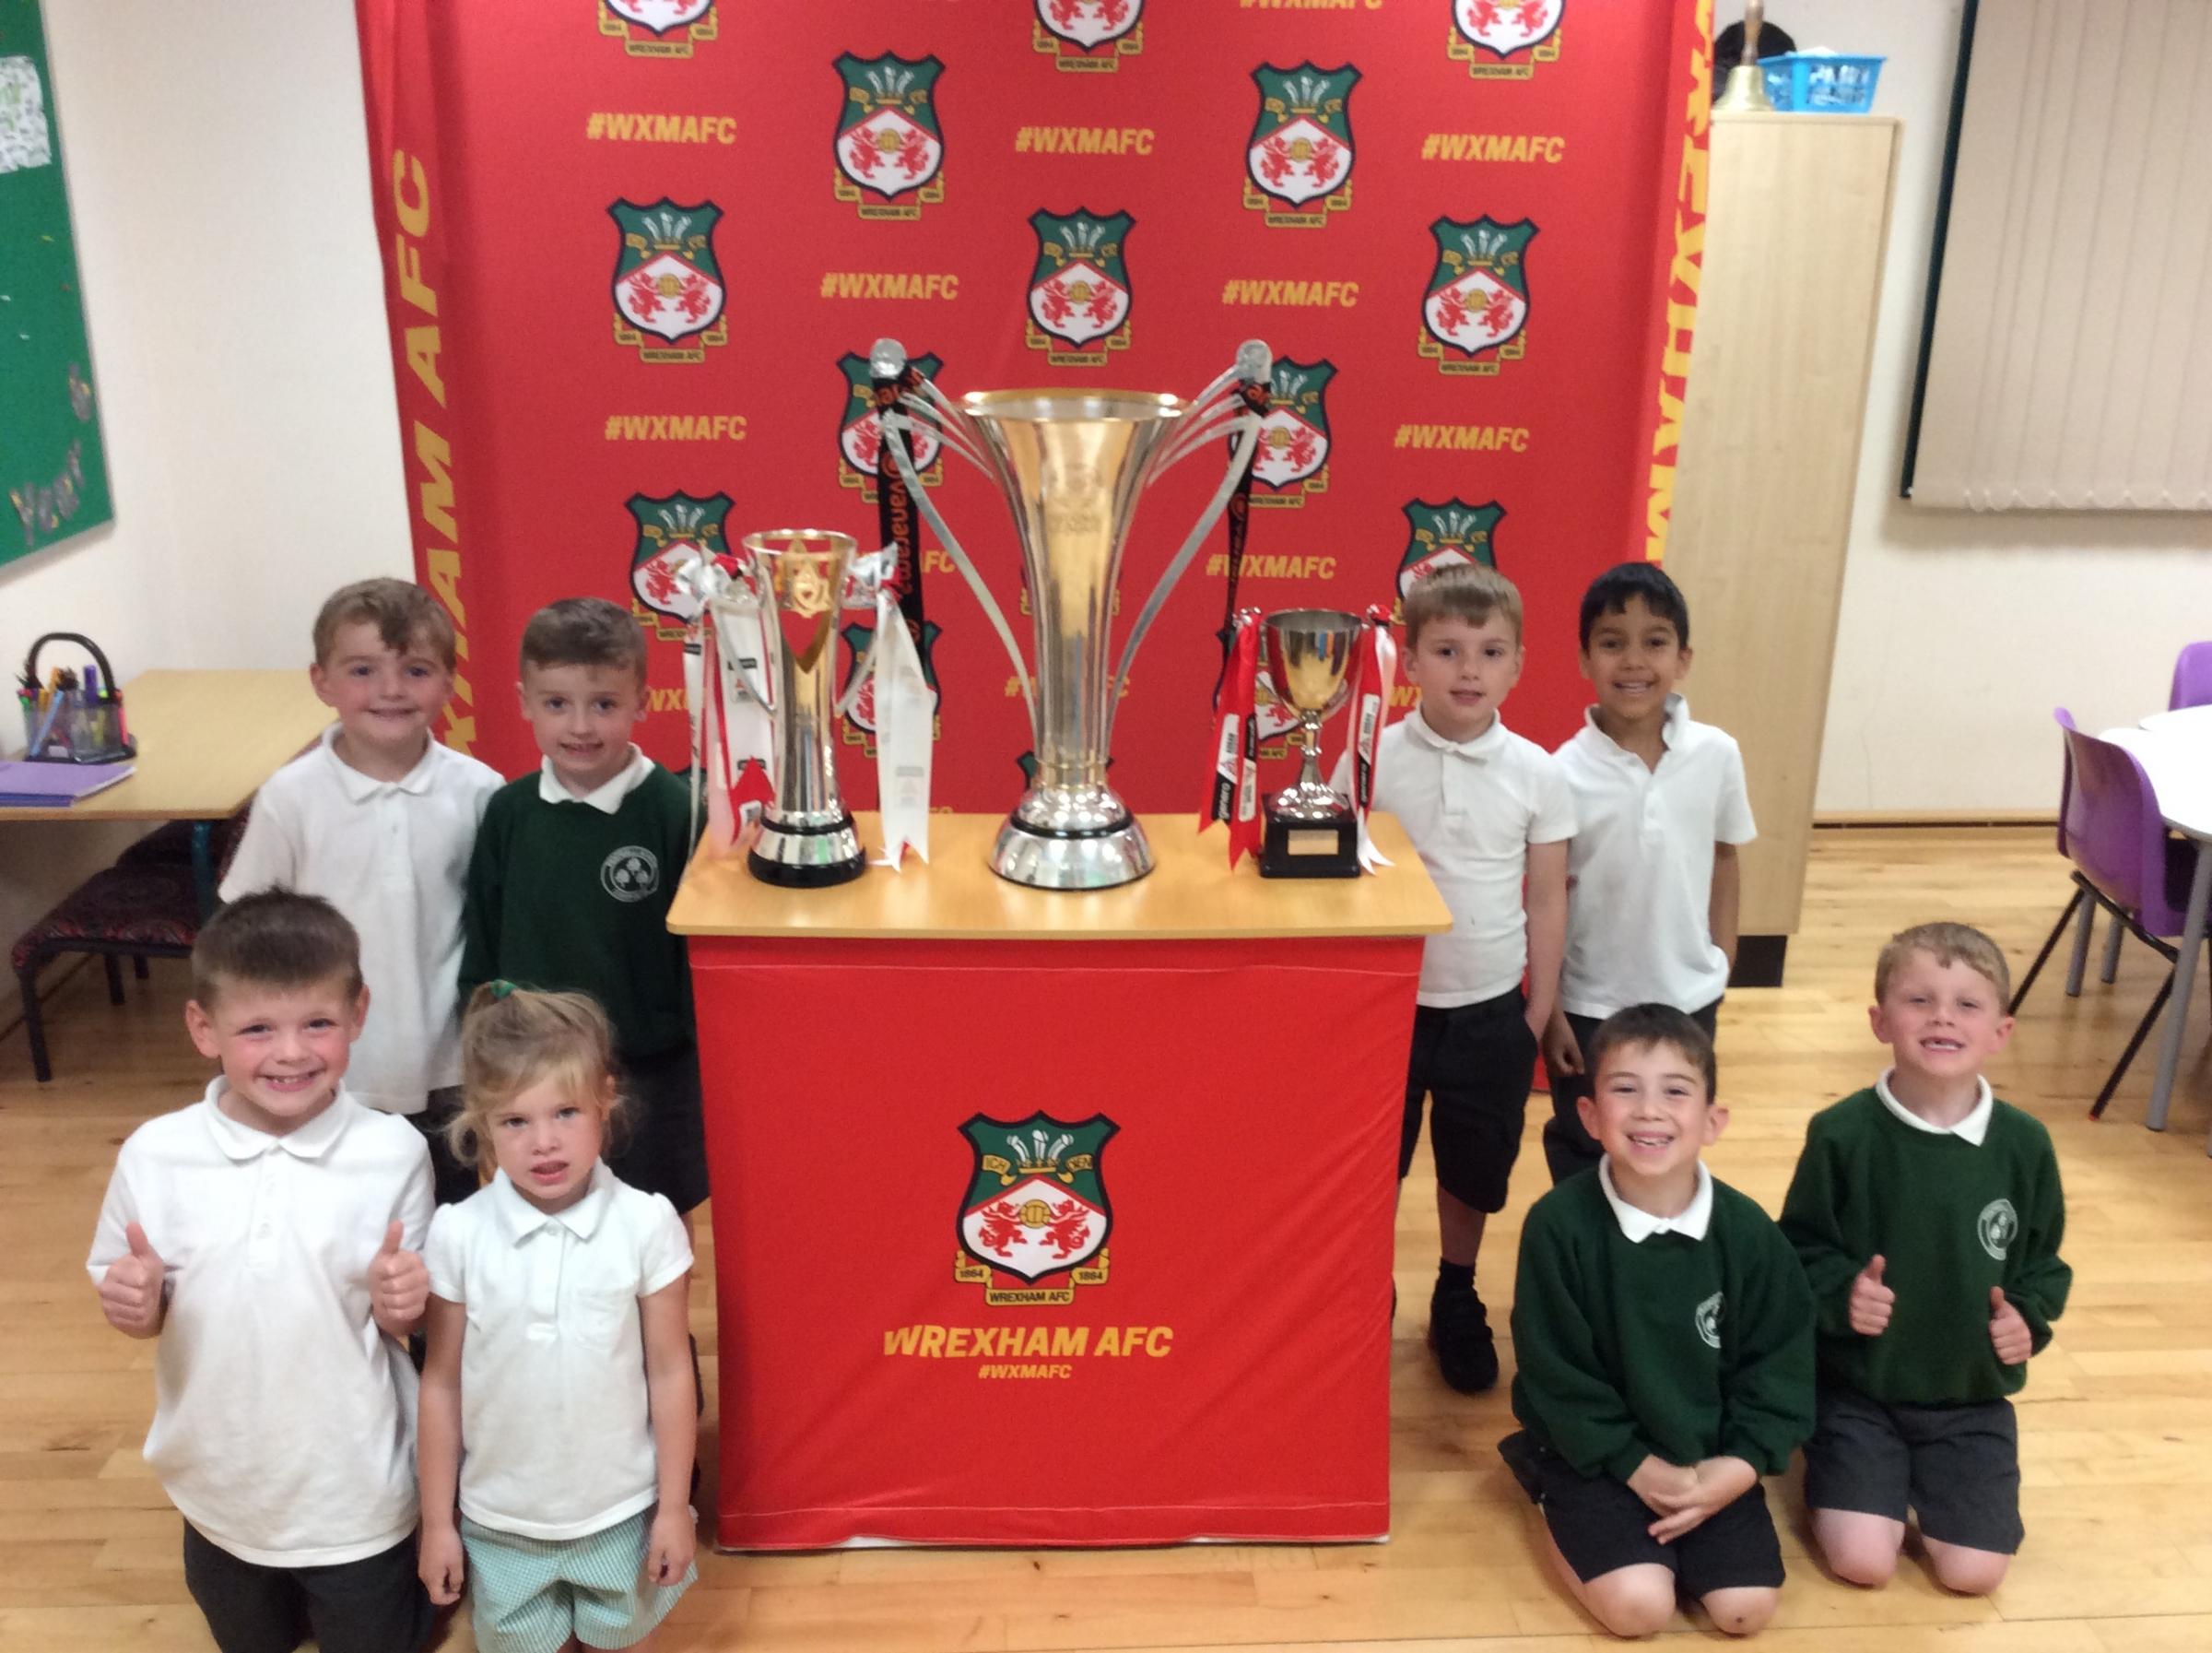 Ysgol Penygelli pupils with the Wrexham AFC trophies.